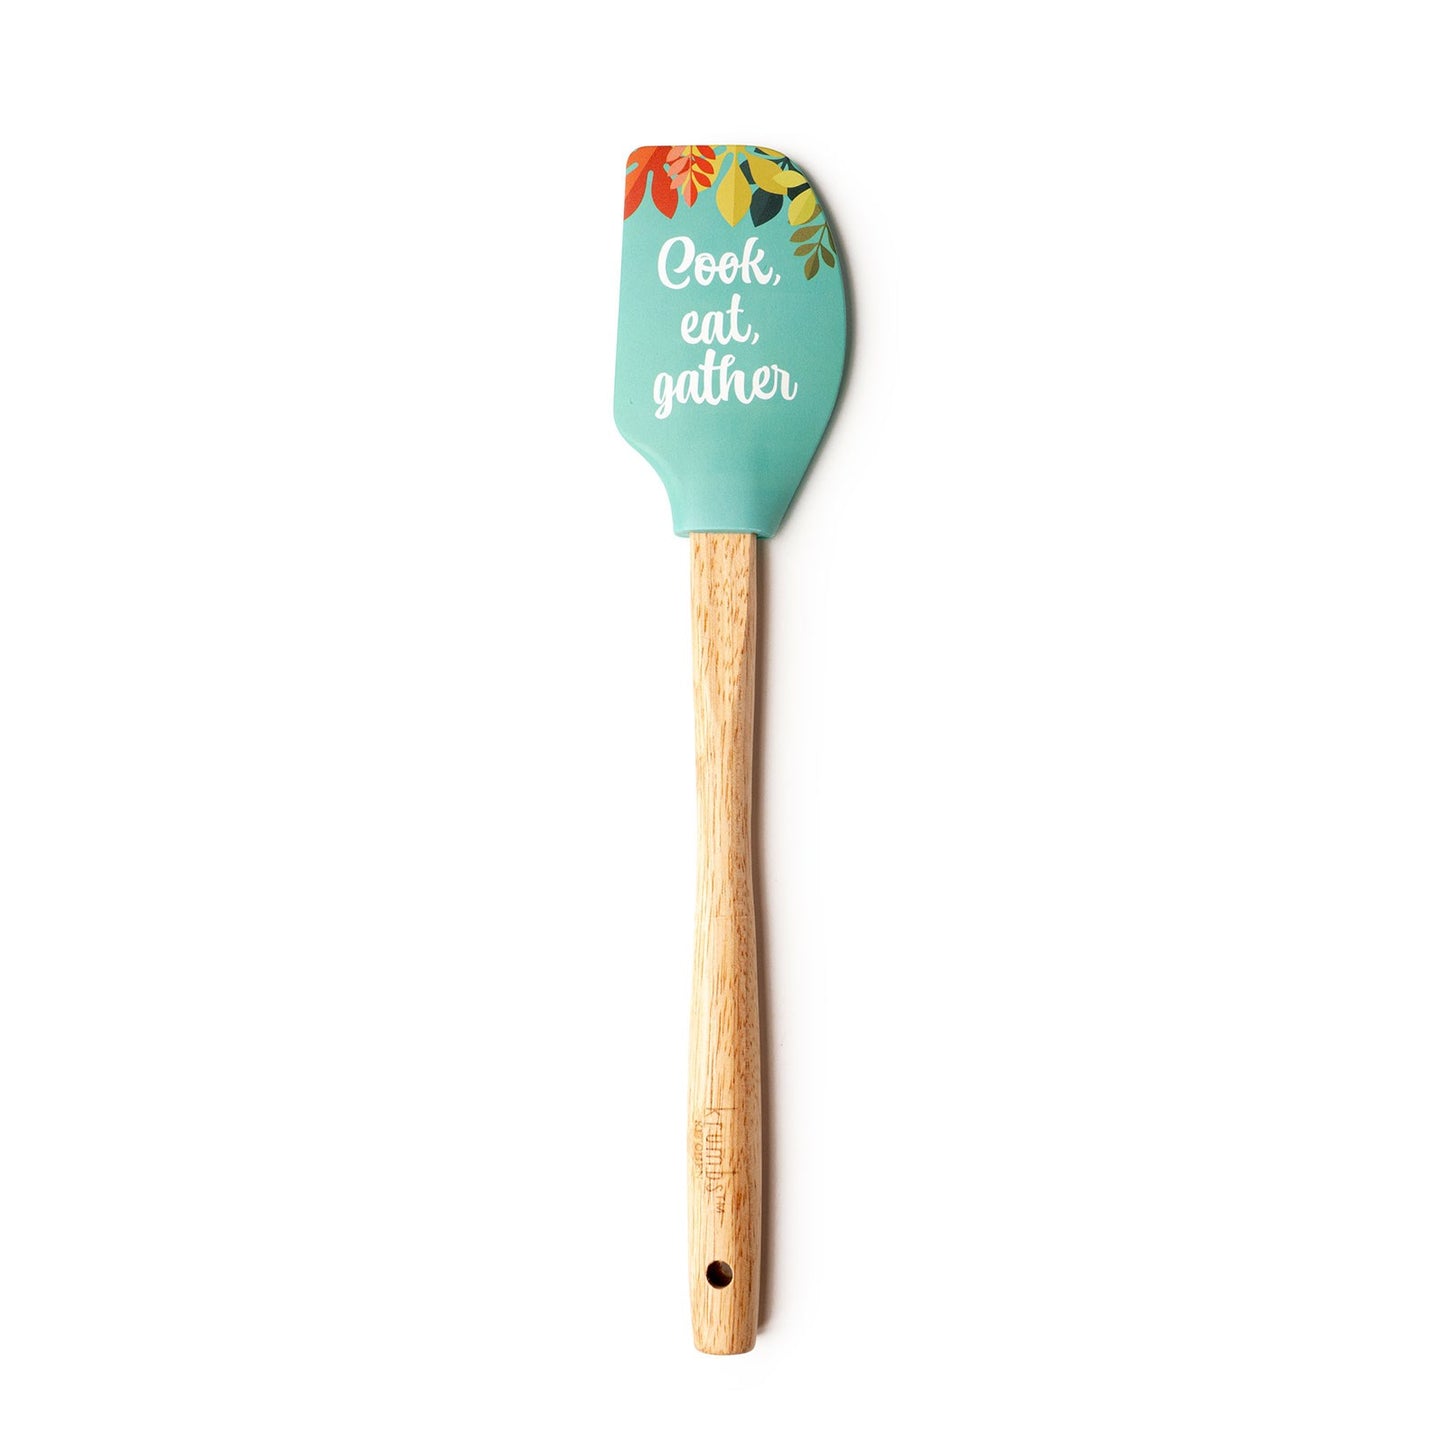 blue spatula with leaf design and "cook, eat, gather" printed on it and a wooden handle.